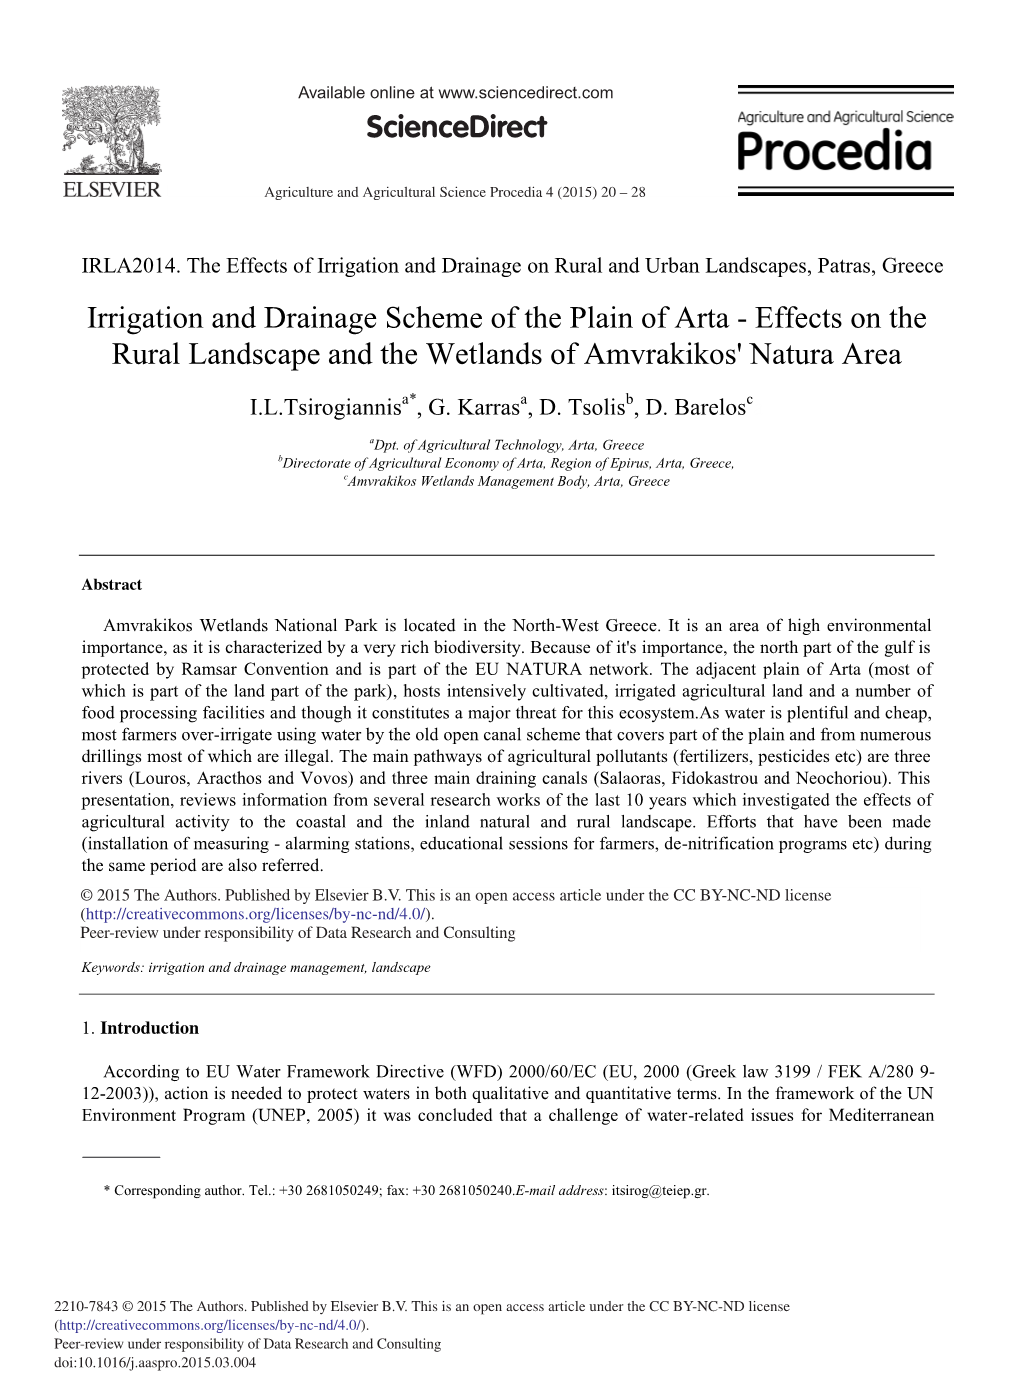 Irrigation and Drainage Scheme of the Plain of Arta – Effects on the Rural